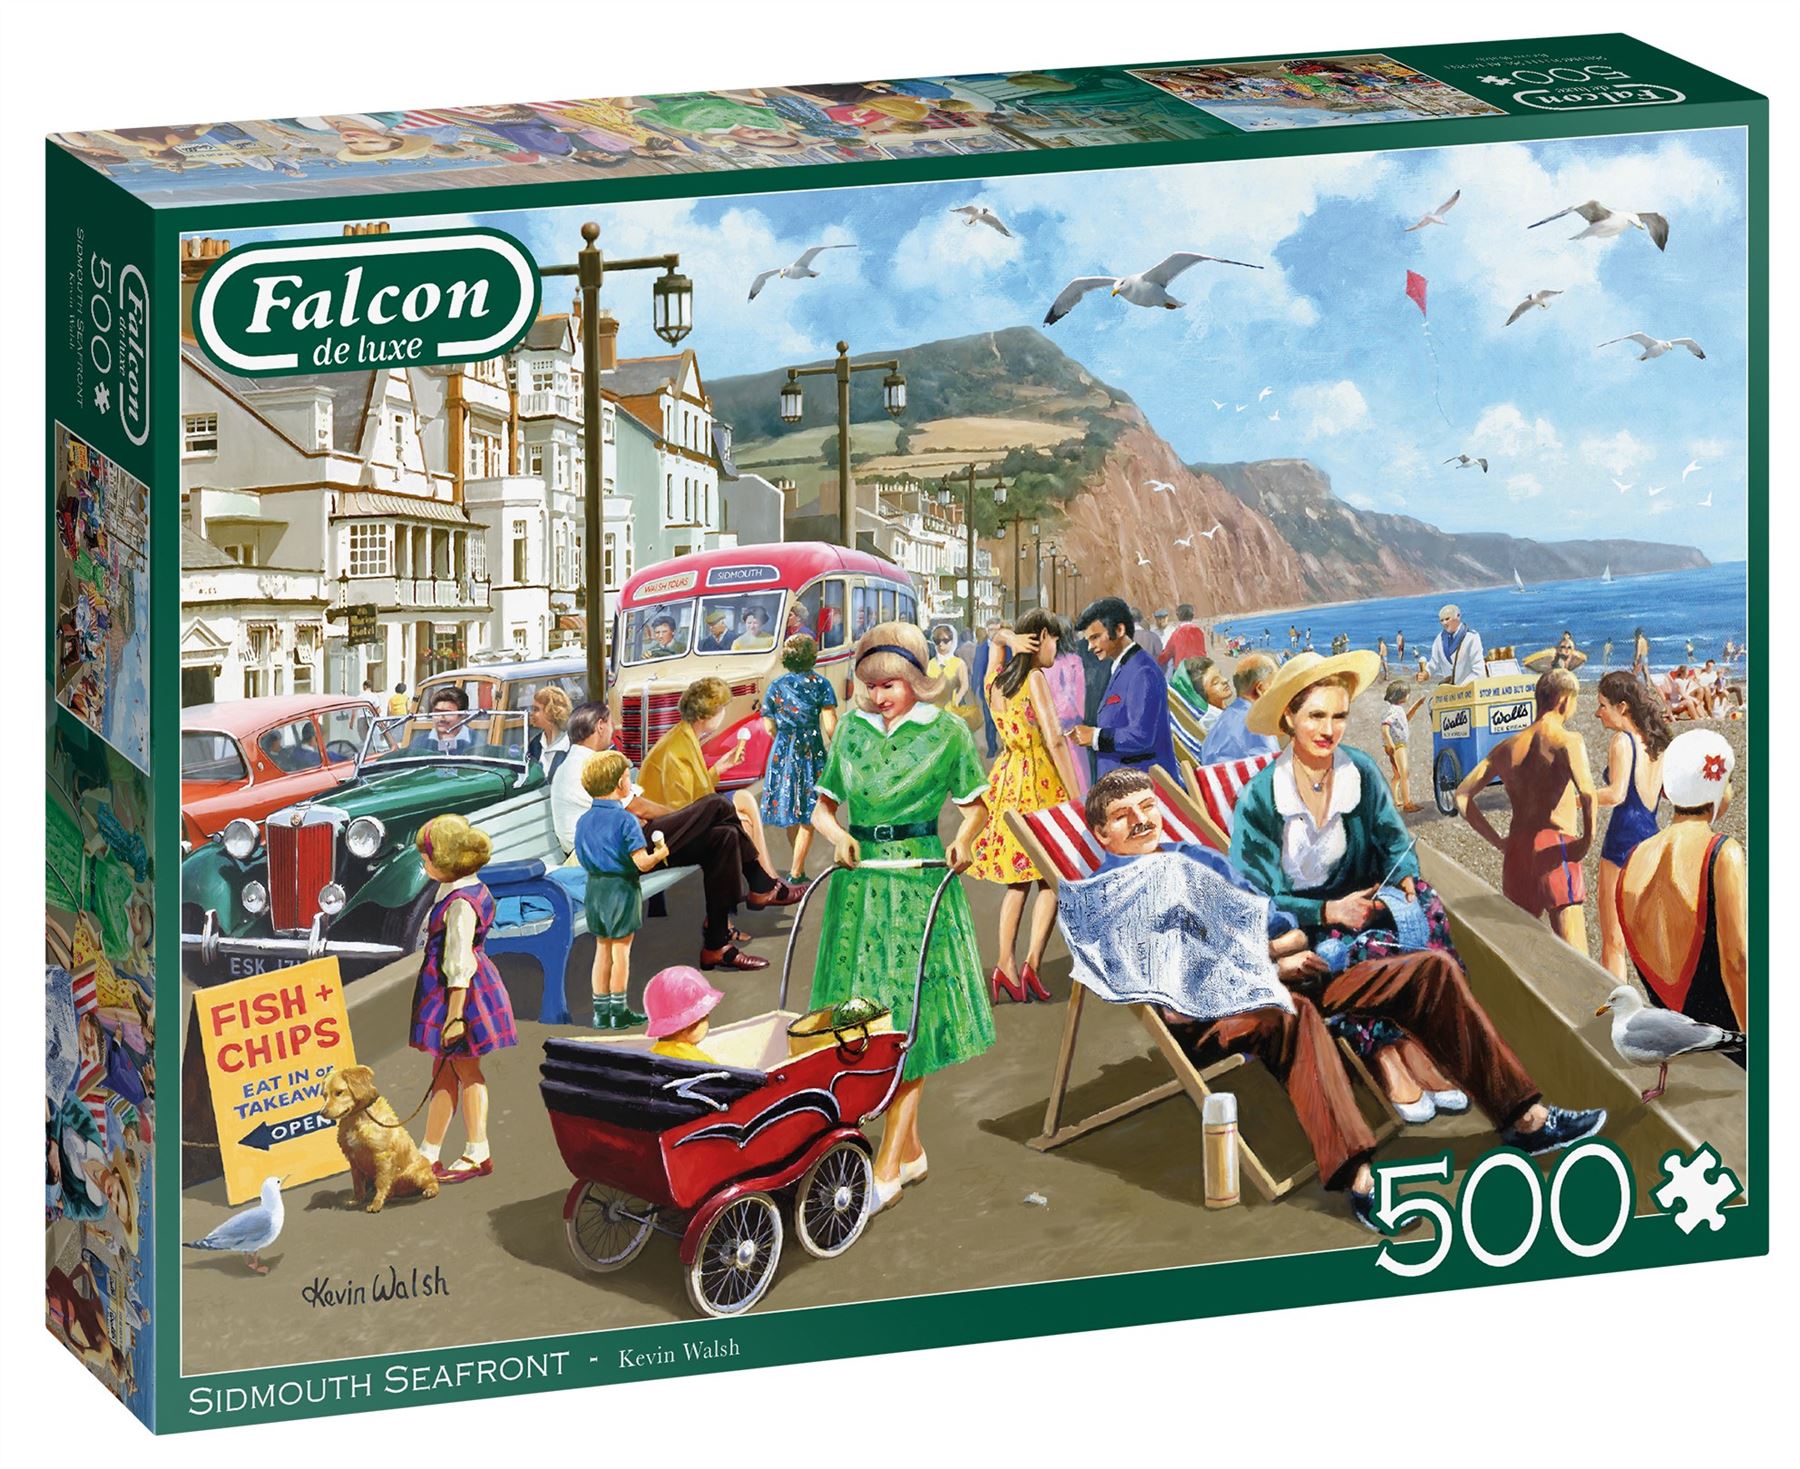 Sidmouth Seafront 500 Piece Jigsaw Puzzle box 1